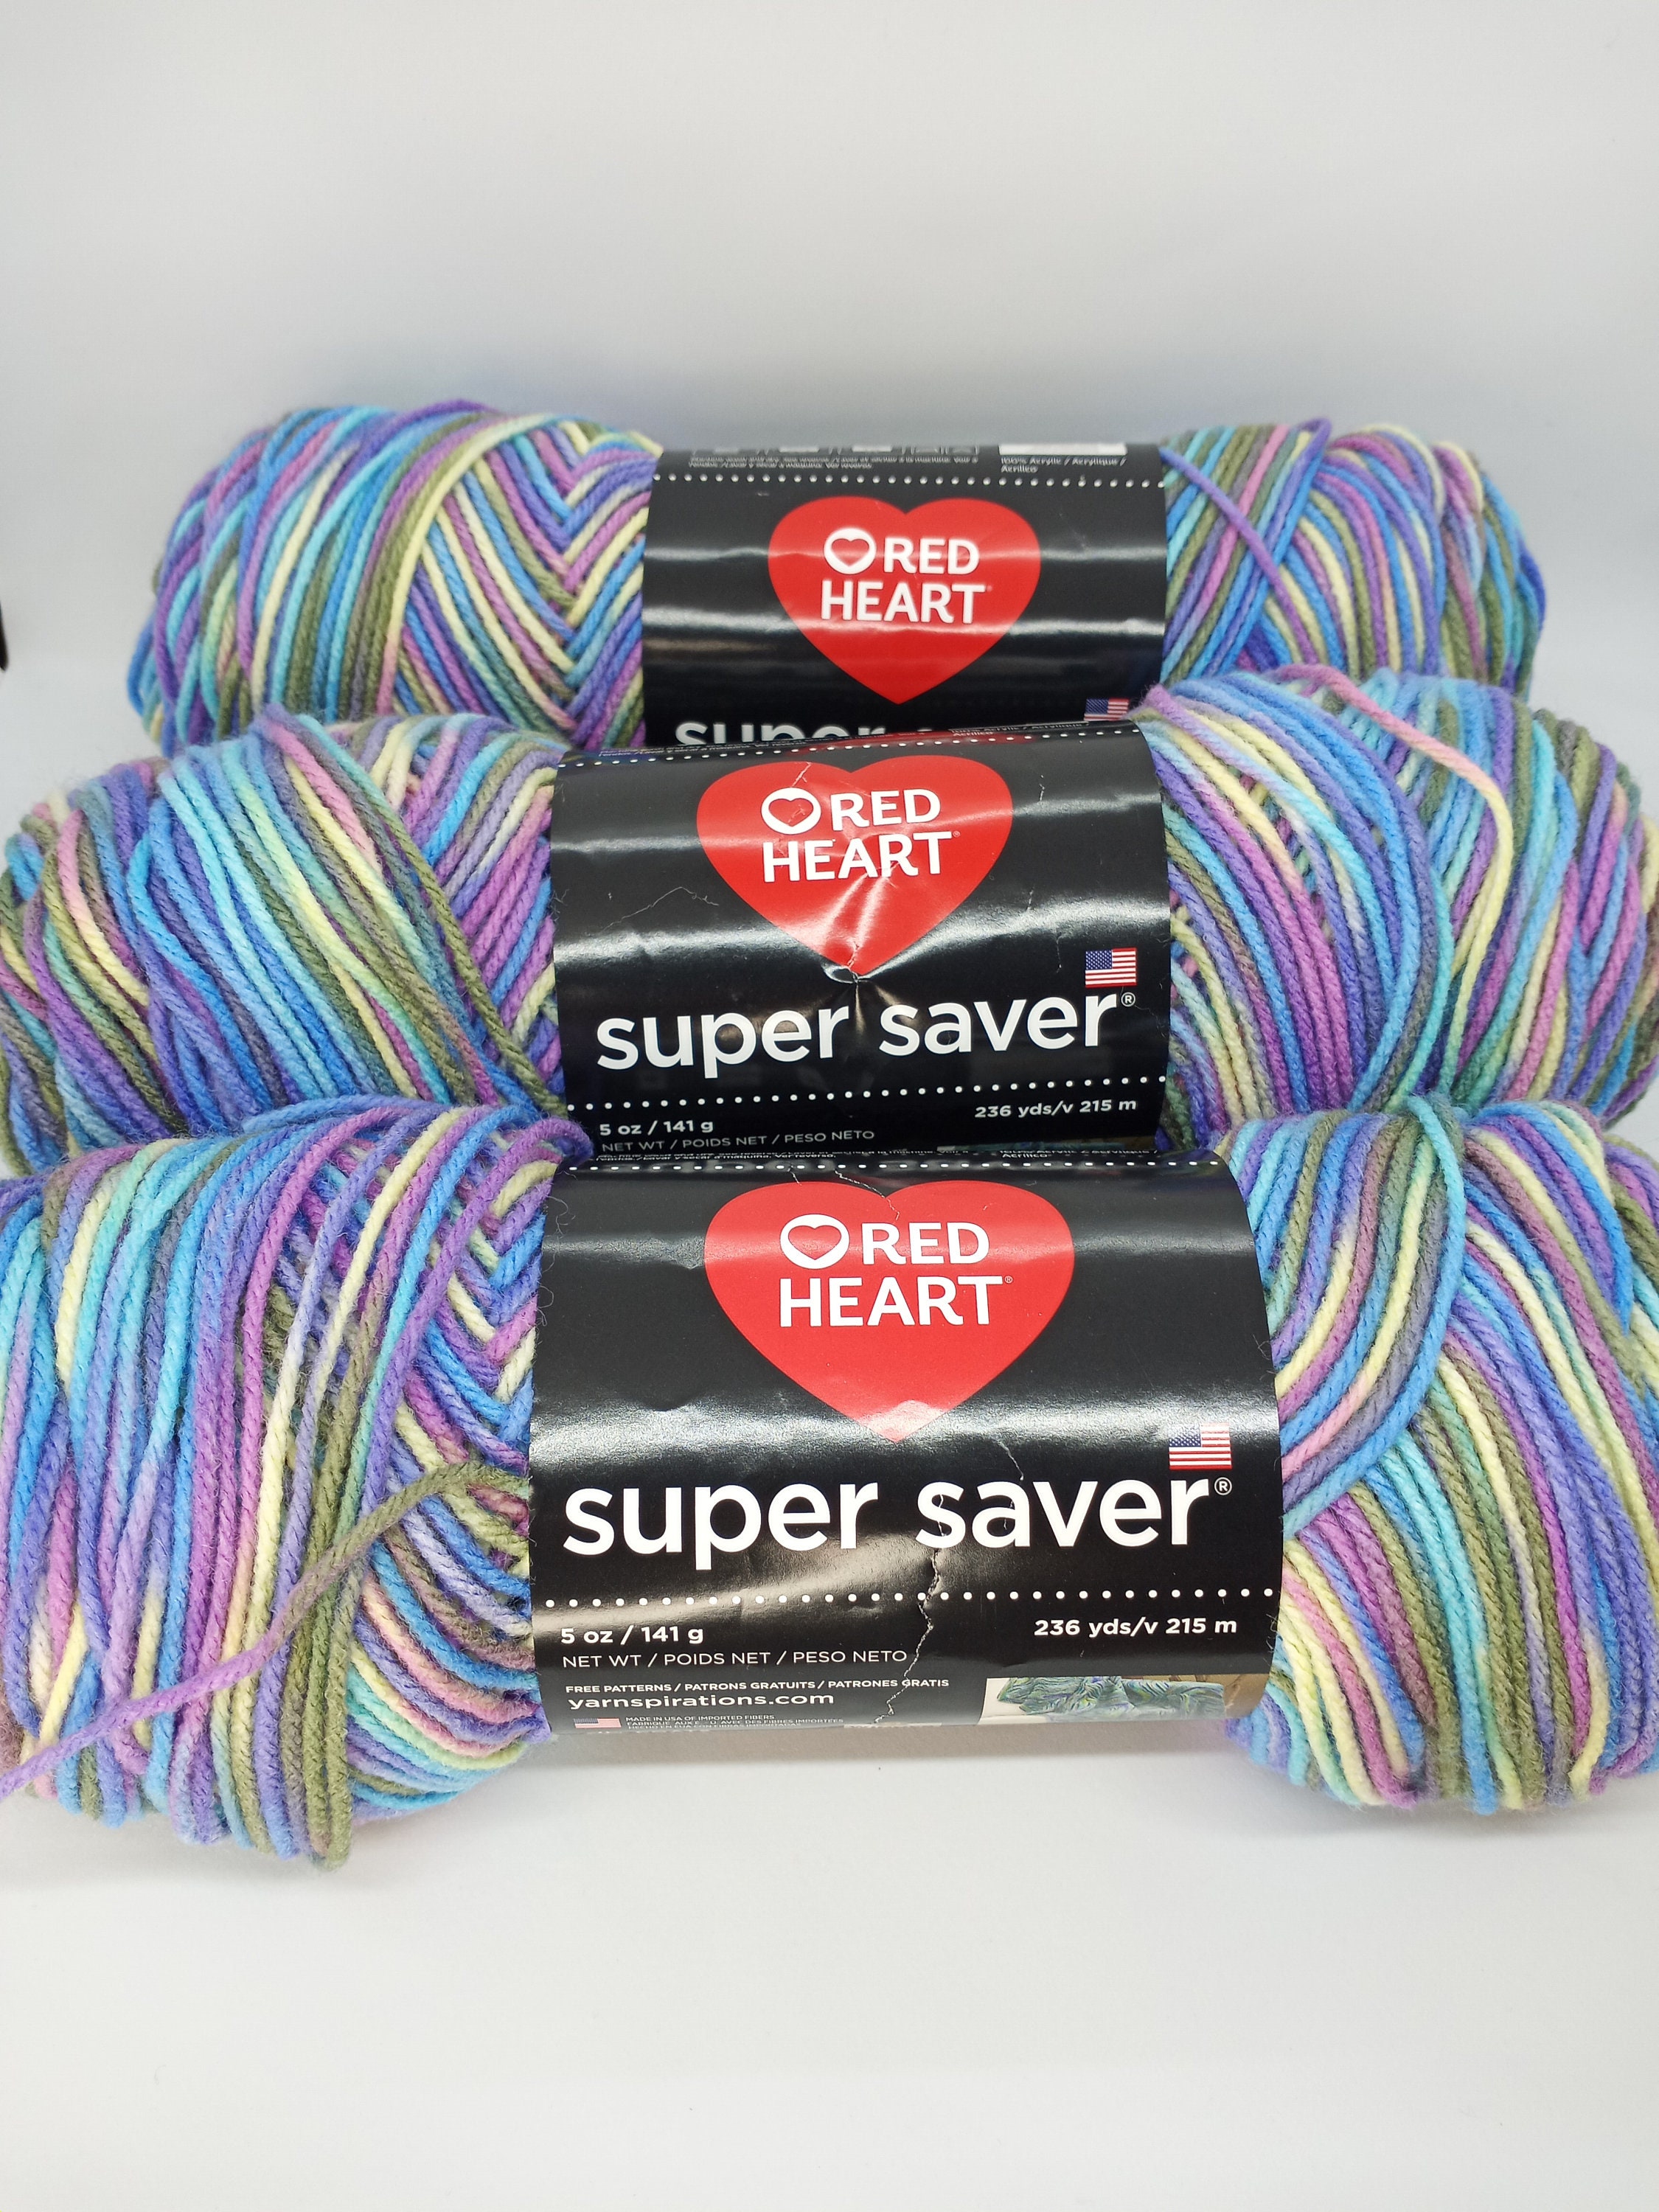  Red Heart Super Saver Yarn (3-Pack) Light Periwinkle E300-347 :  Arts, Crafts & Sewing